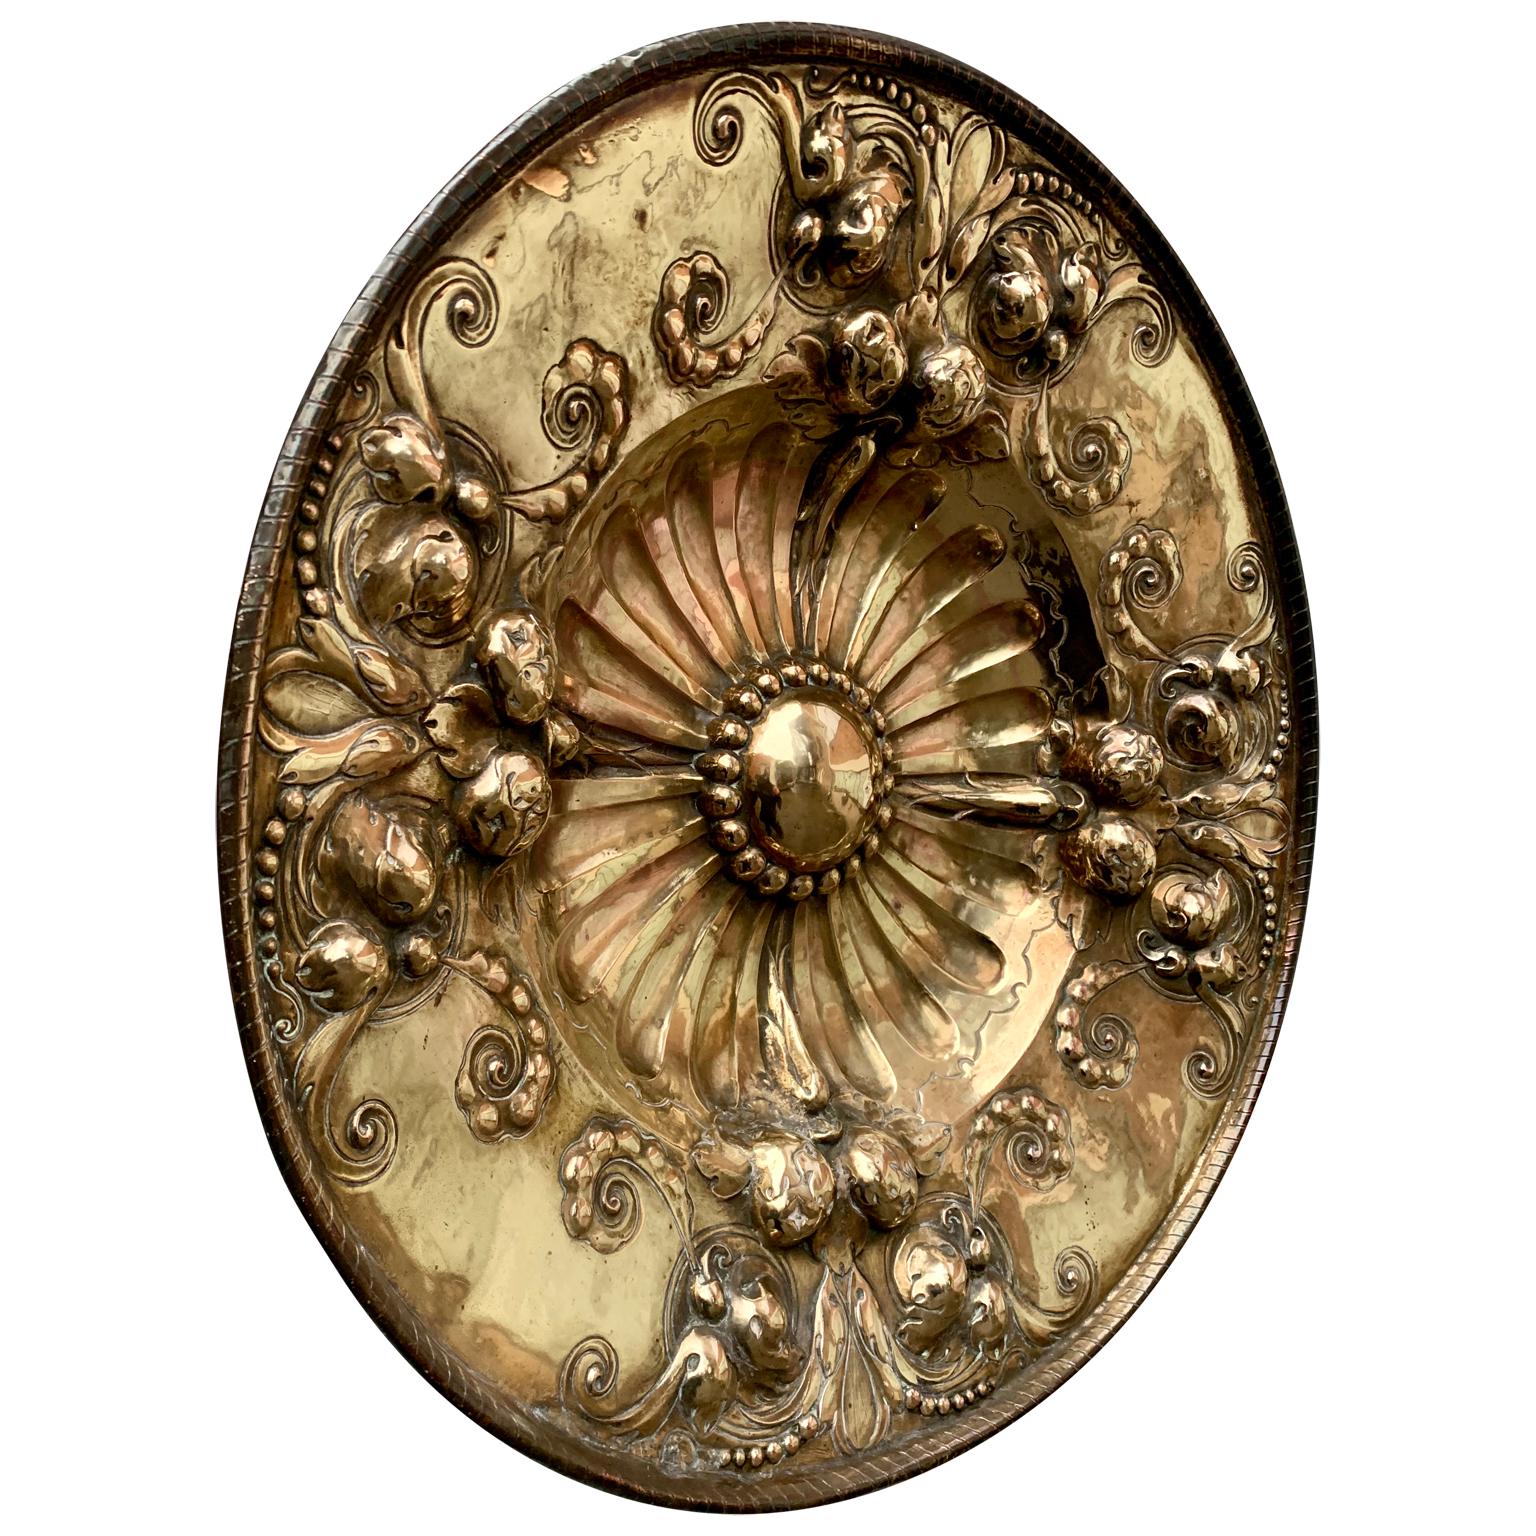 A 19th century baptismal plate in brass with beveled flower decoration to celebrate the birth of the infant.
The dish can be wall-mounted.